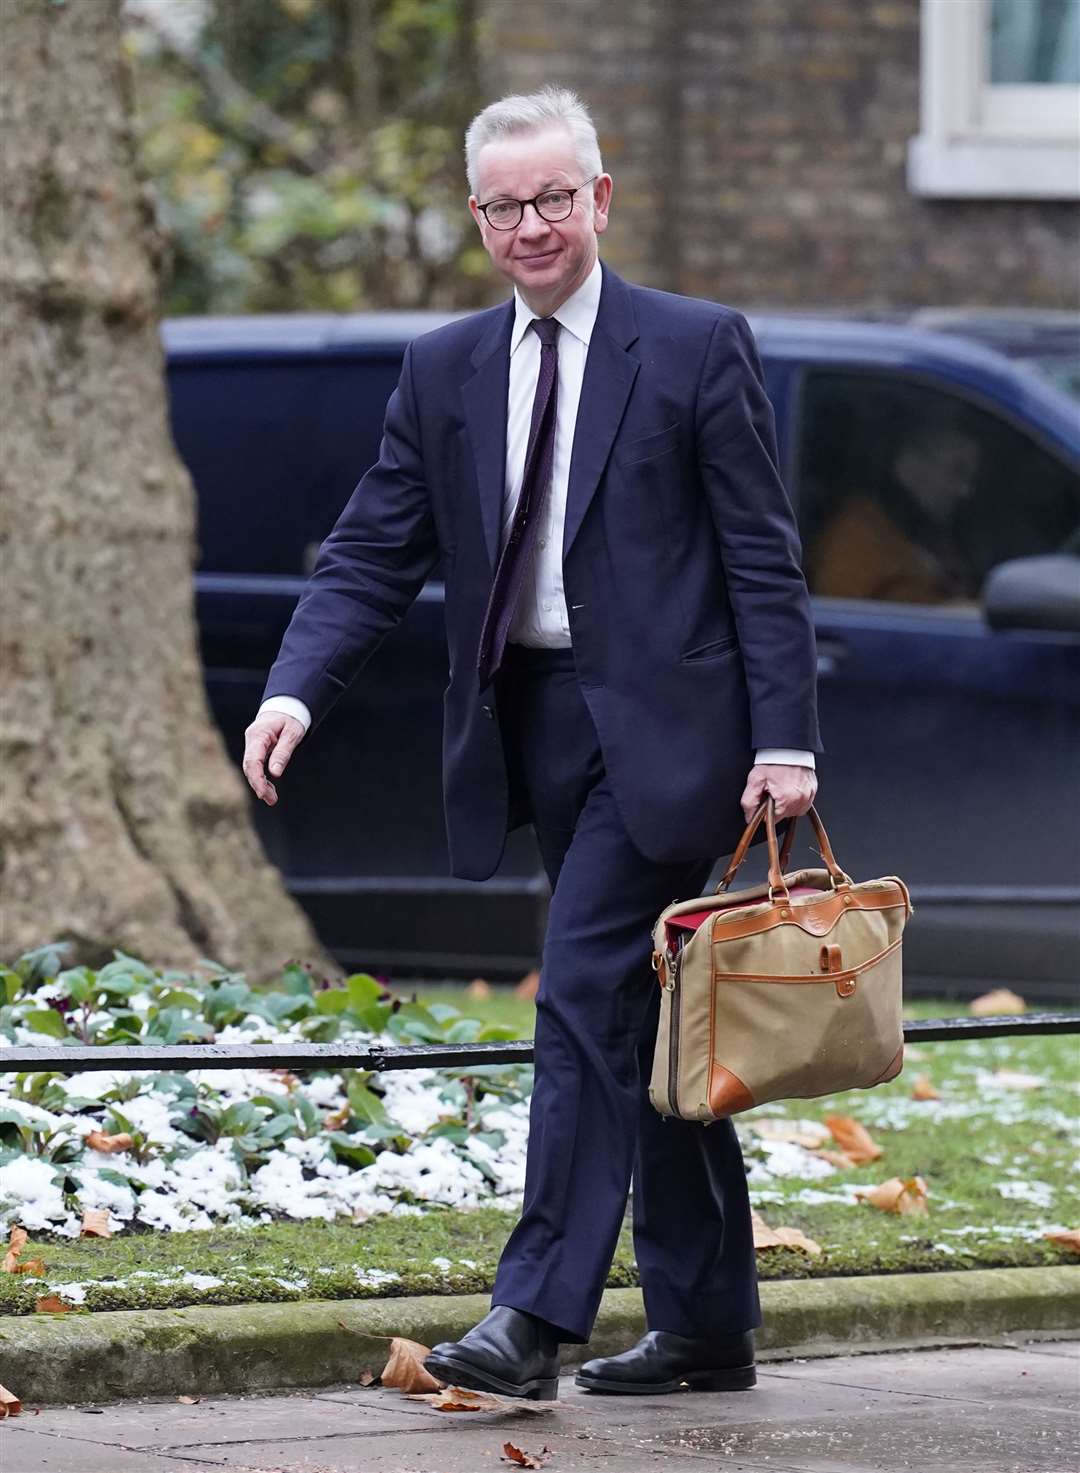 Michael Gove said he was ‘proud’ to have agreed a historic new devolution deal with the North East (Stefan Rousseau/PA)